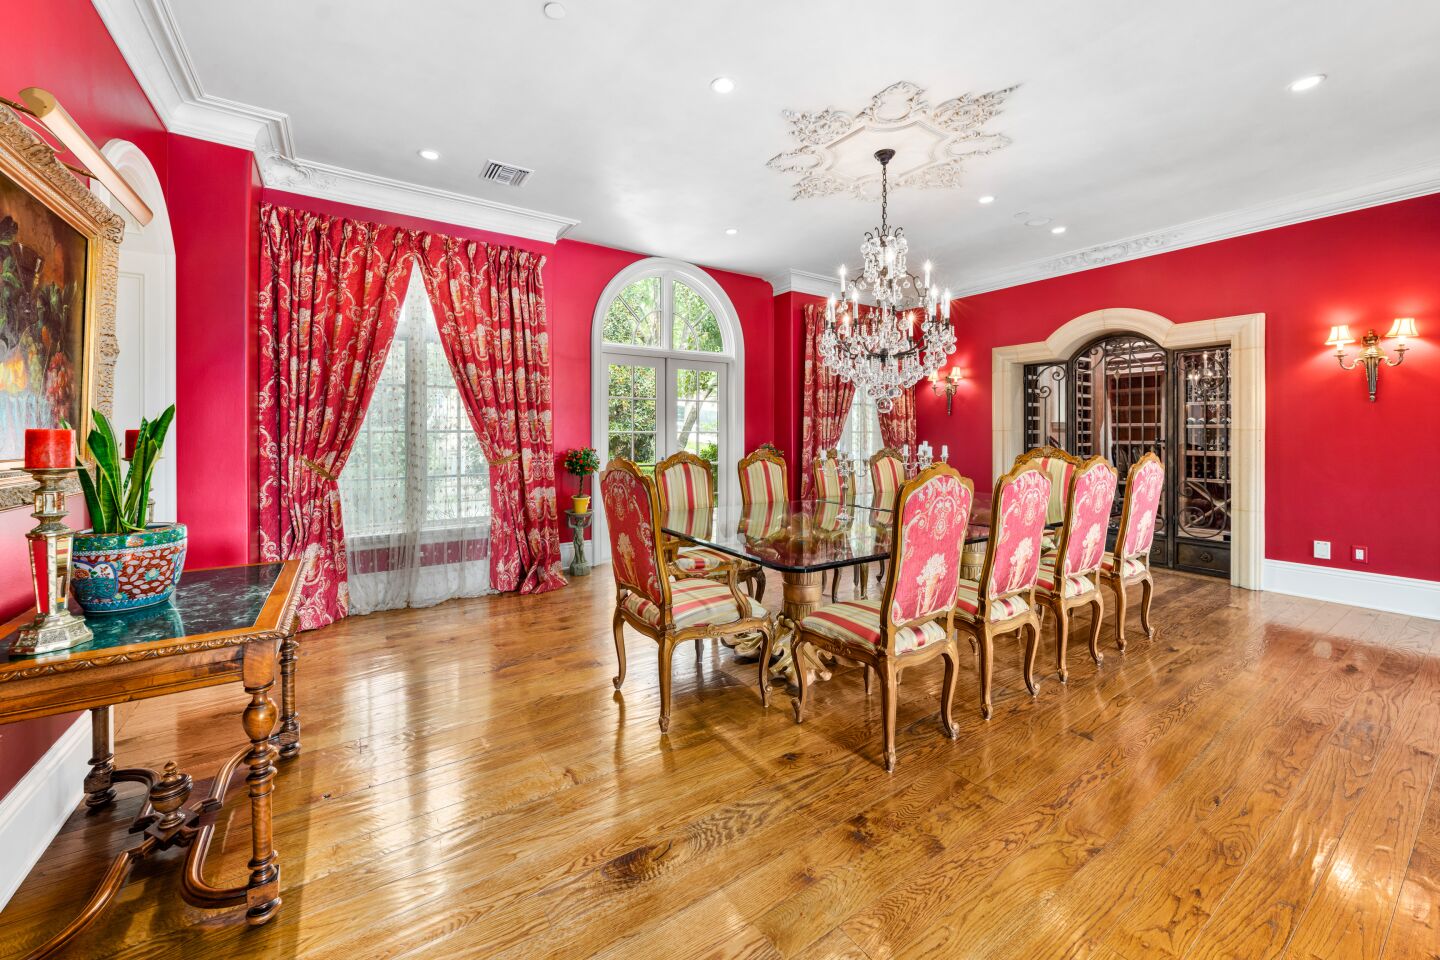 The dining room is red with curtains in front of windows and a formal dining set.